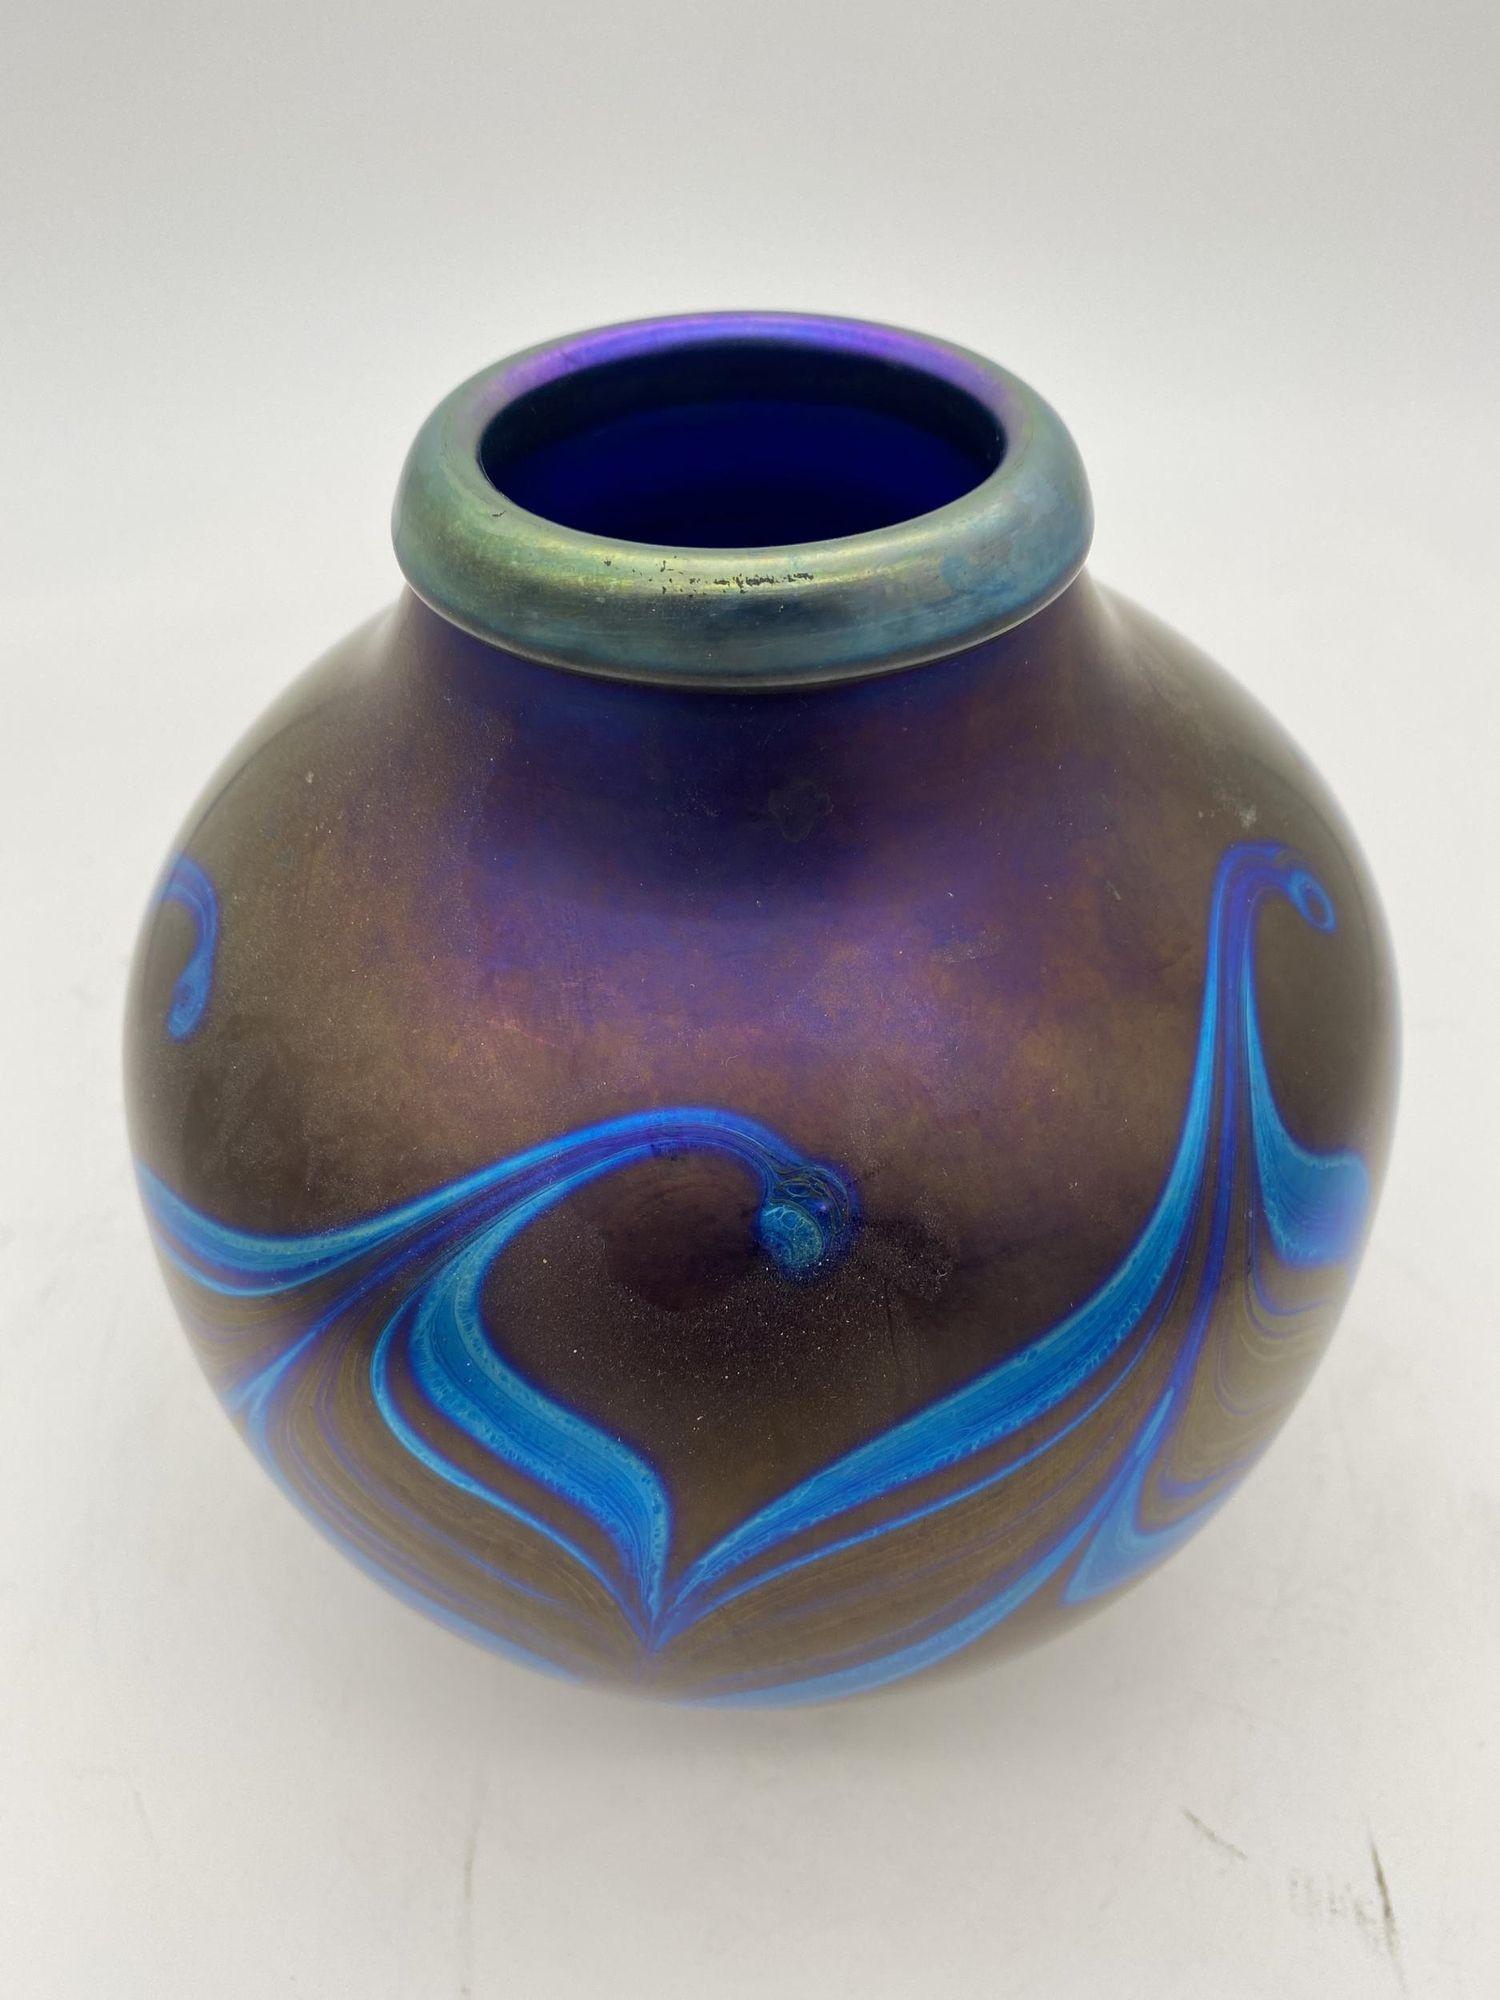 Lundberg Studios Blue Iridescent California Art Glass Vase with a Wave Pattern.

Lundberg Studios is located in the small coastal town of Davenport, California began in the backyard hot shop of James Lundberg, in 1970 with became a studio of master